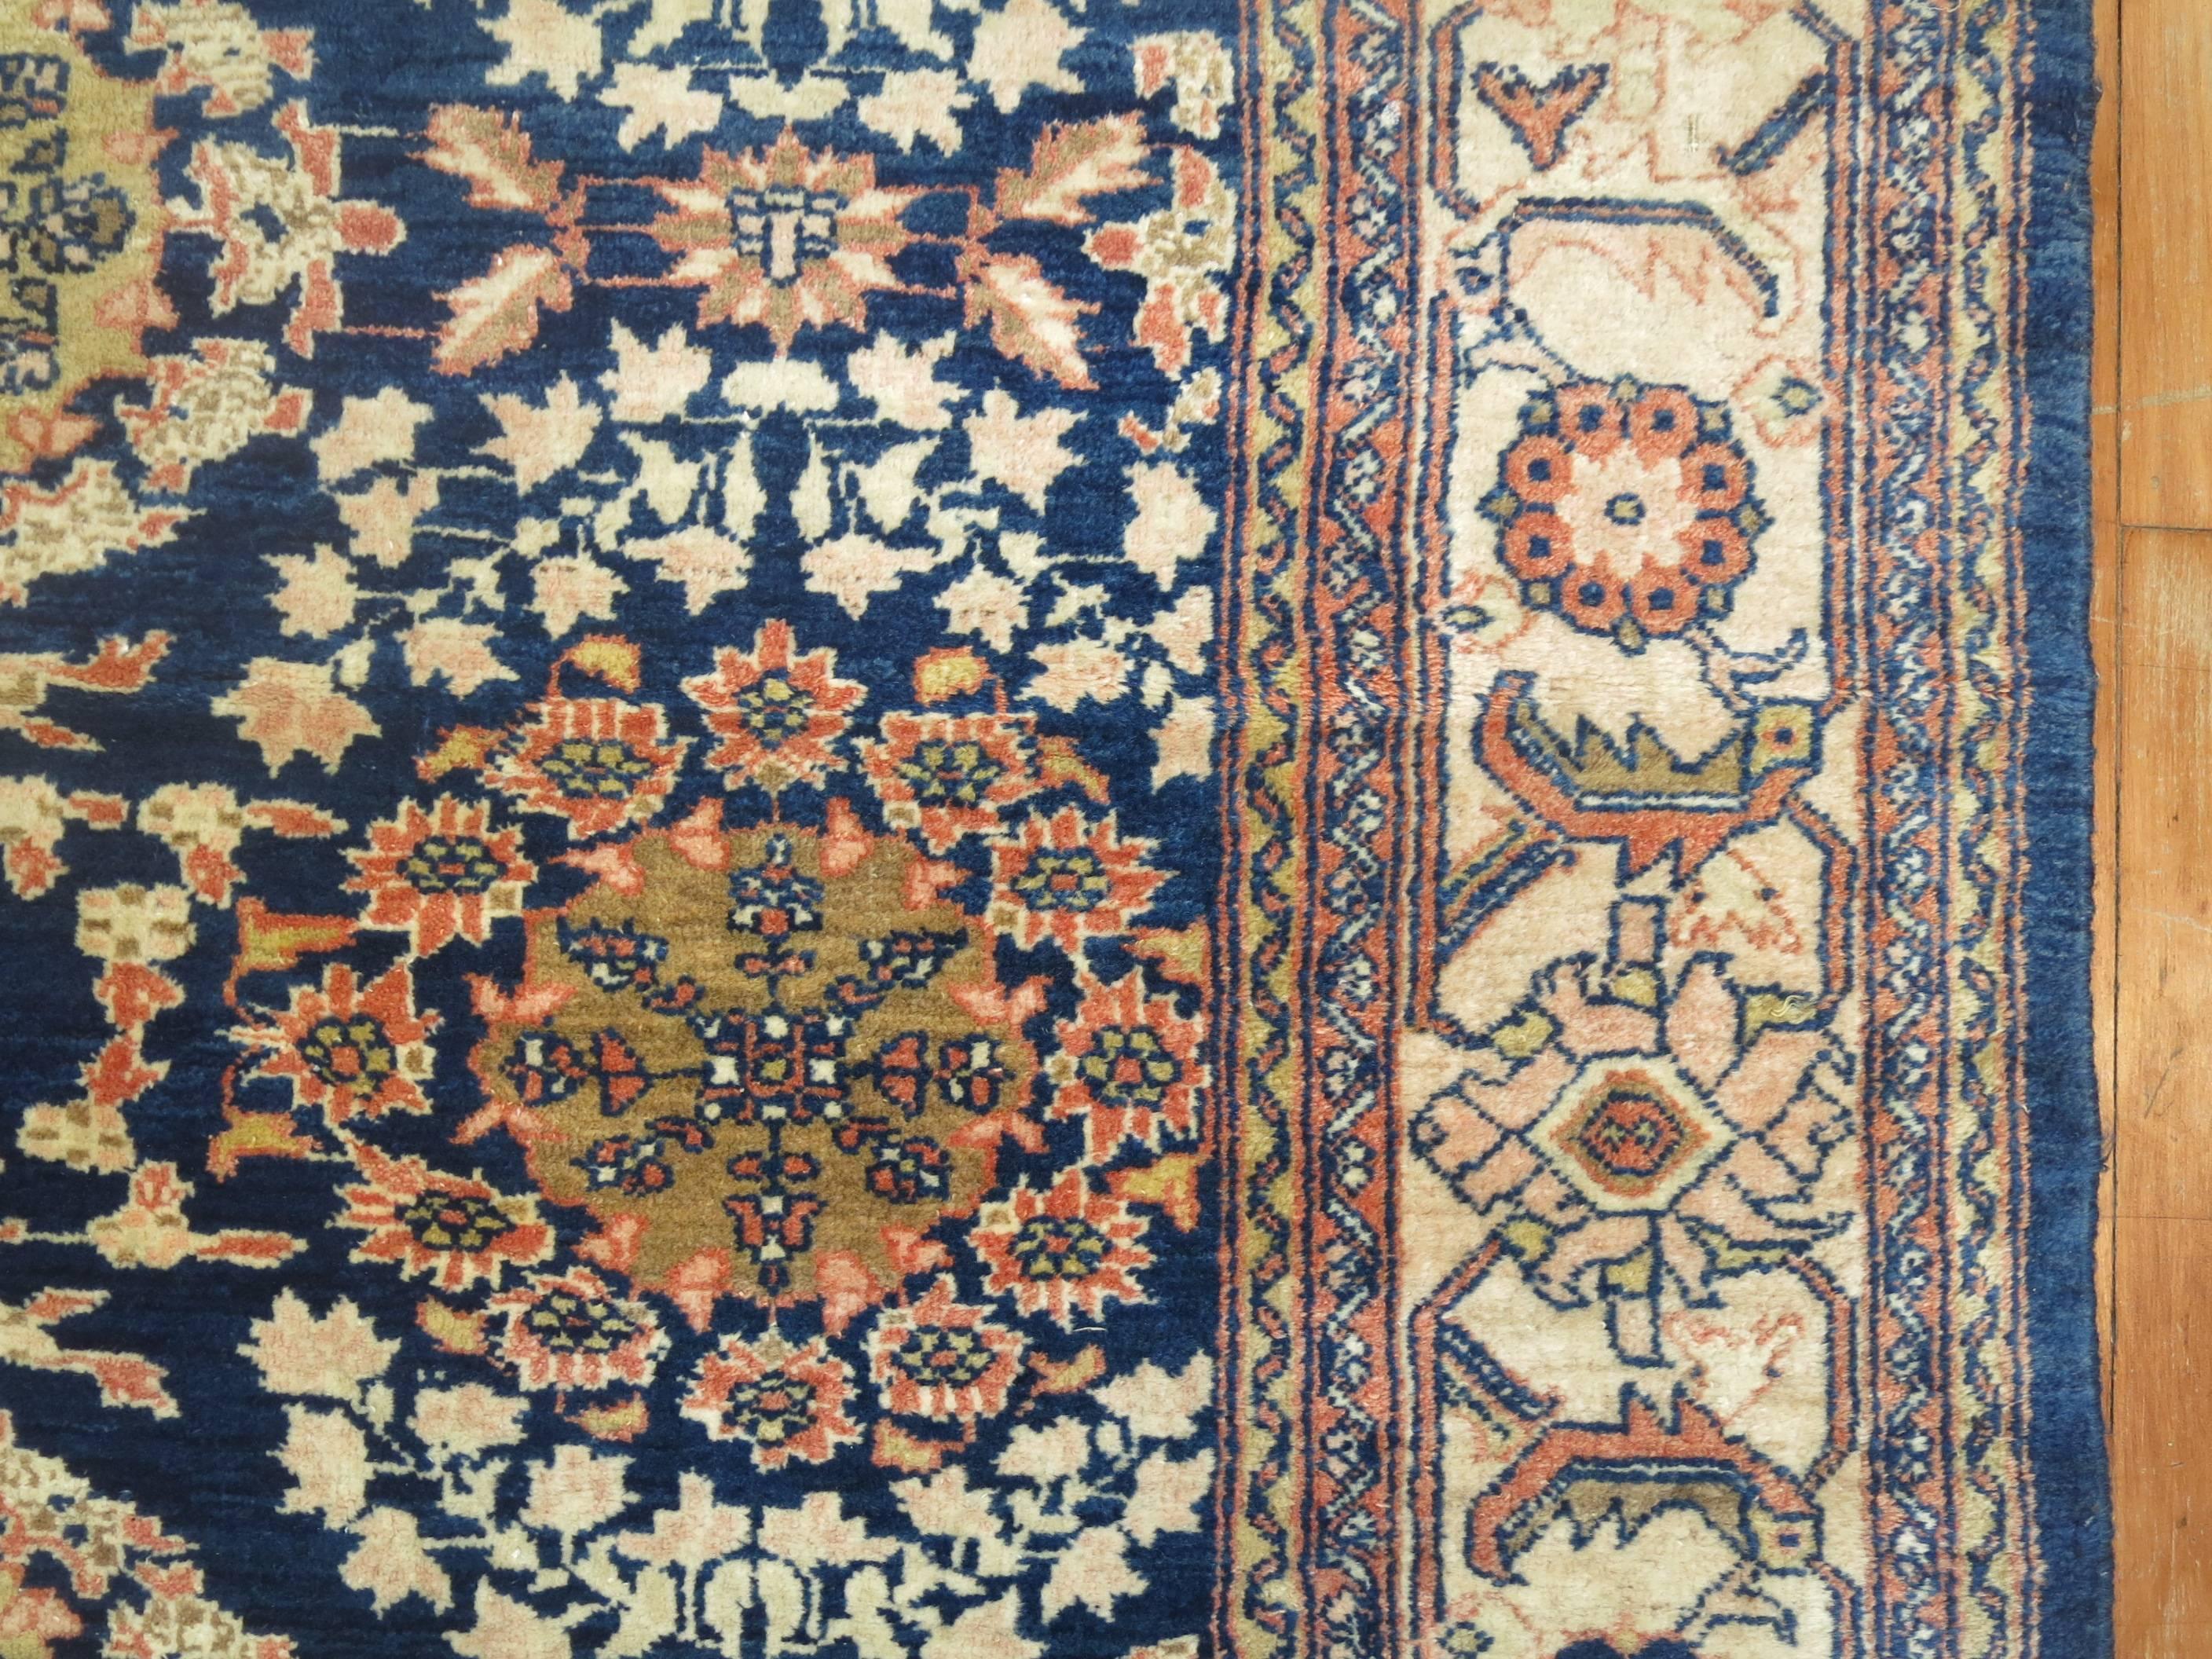 Room size Persian Mahal rug with a blue field and ivory border.

Mahal Persian carpets from the 19th century and turn of the 20th century have become one of the most desirable among Persian village weavings, as they appeal strongly to both